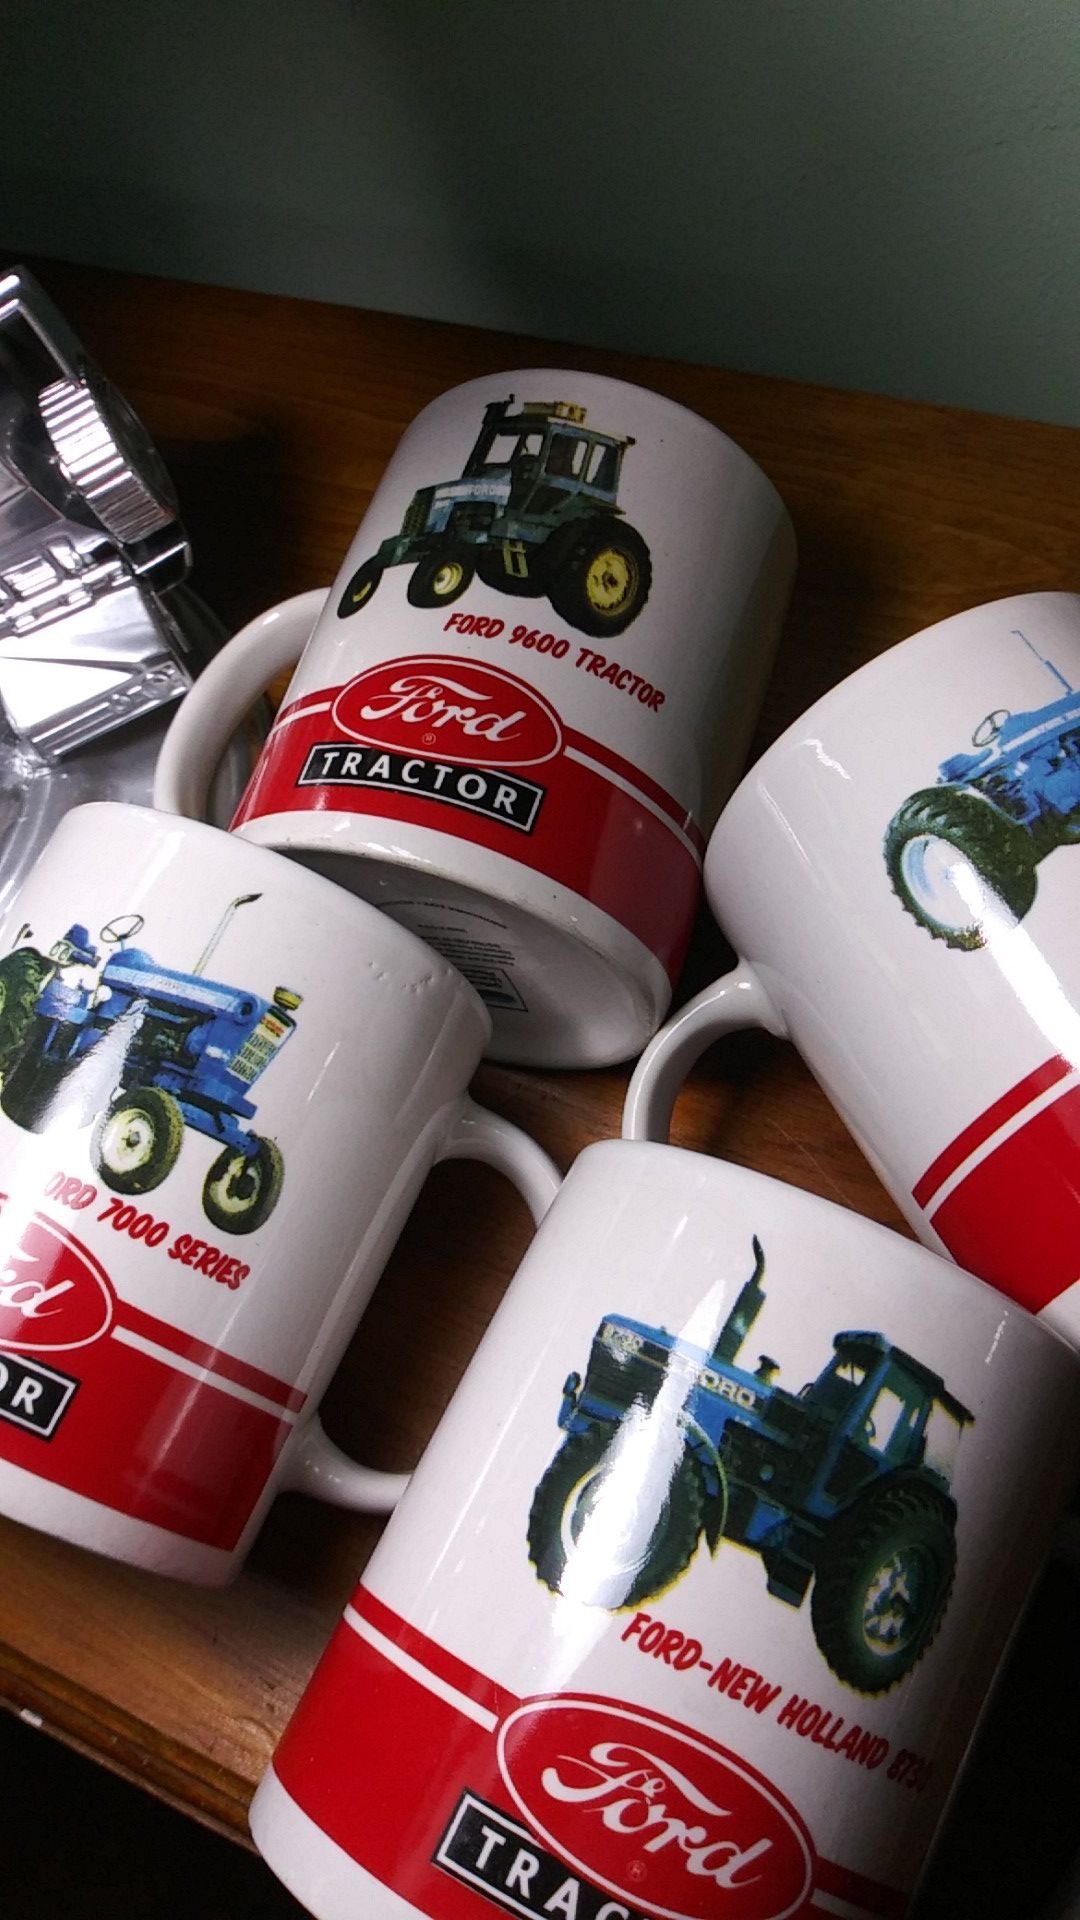 Ford Tractor Coffee cups sell all four as a set